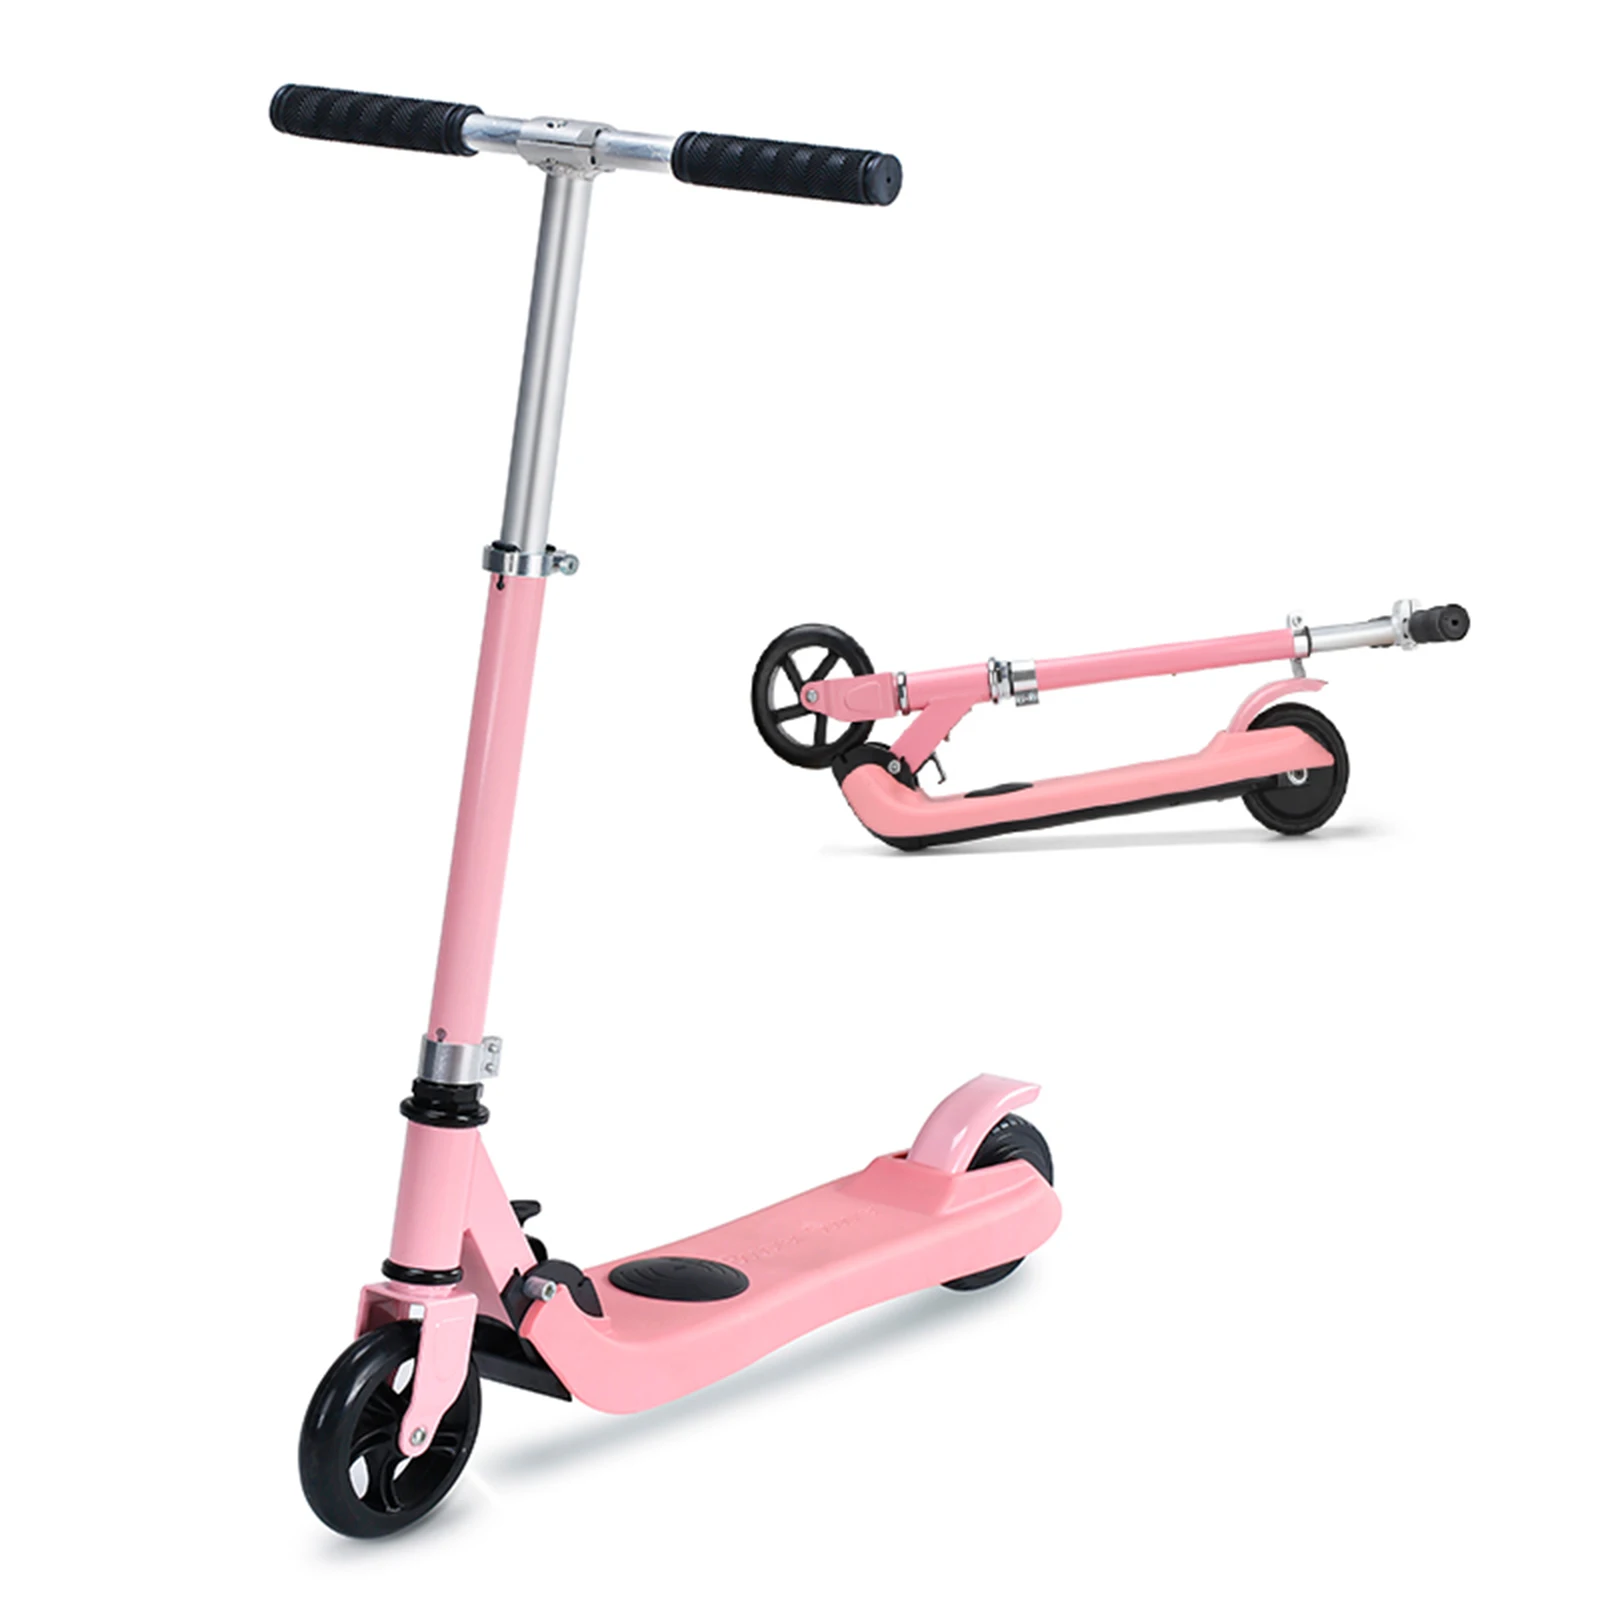 

2021 Europe US Warehouse High Quailty Portable Kick E Scooter for Kids Child Electric Best Gift for Children E-scooter